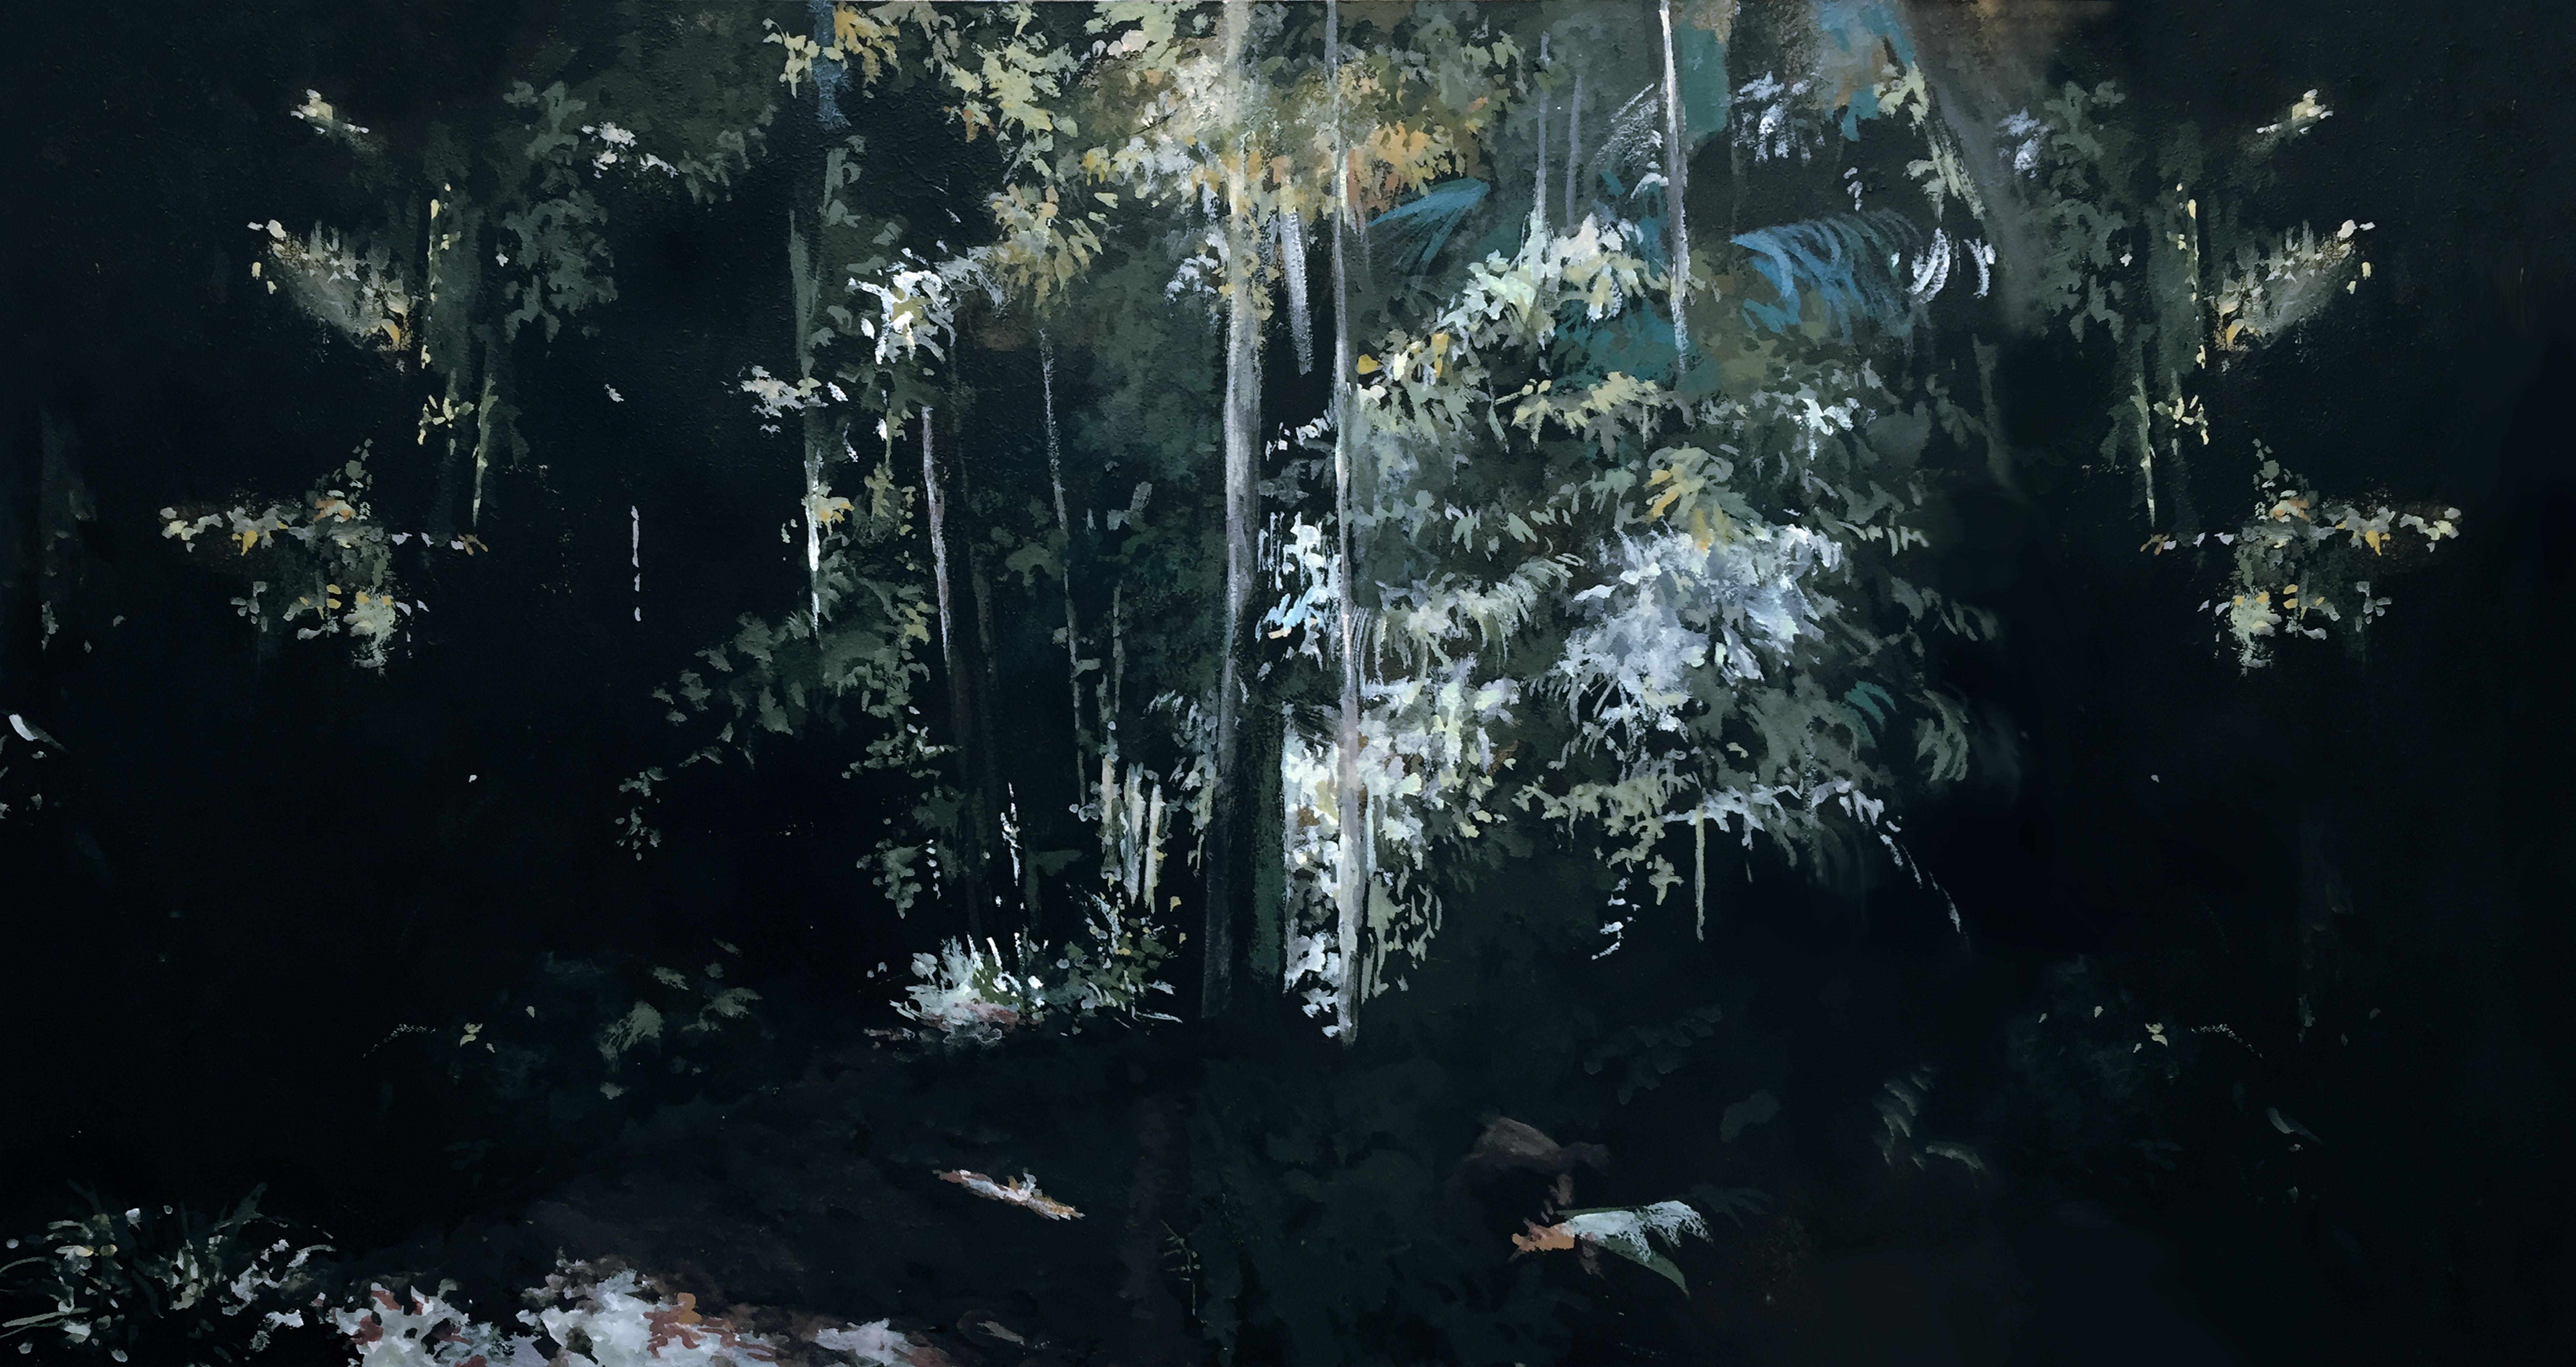 Tricks of the light in the heart of a deep shady jungle.

Price is related to 1 sheet (100 x 300 cm)
Available upon order: we design and execute hand painted, custom-made decorations on paper.
Completely customizable: colors, foliage composition